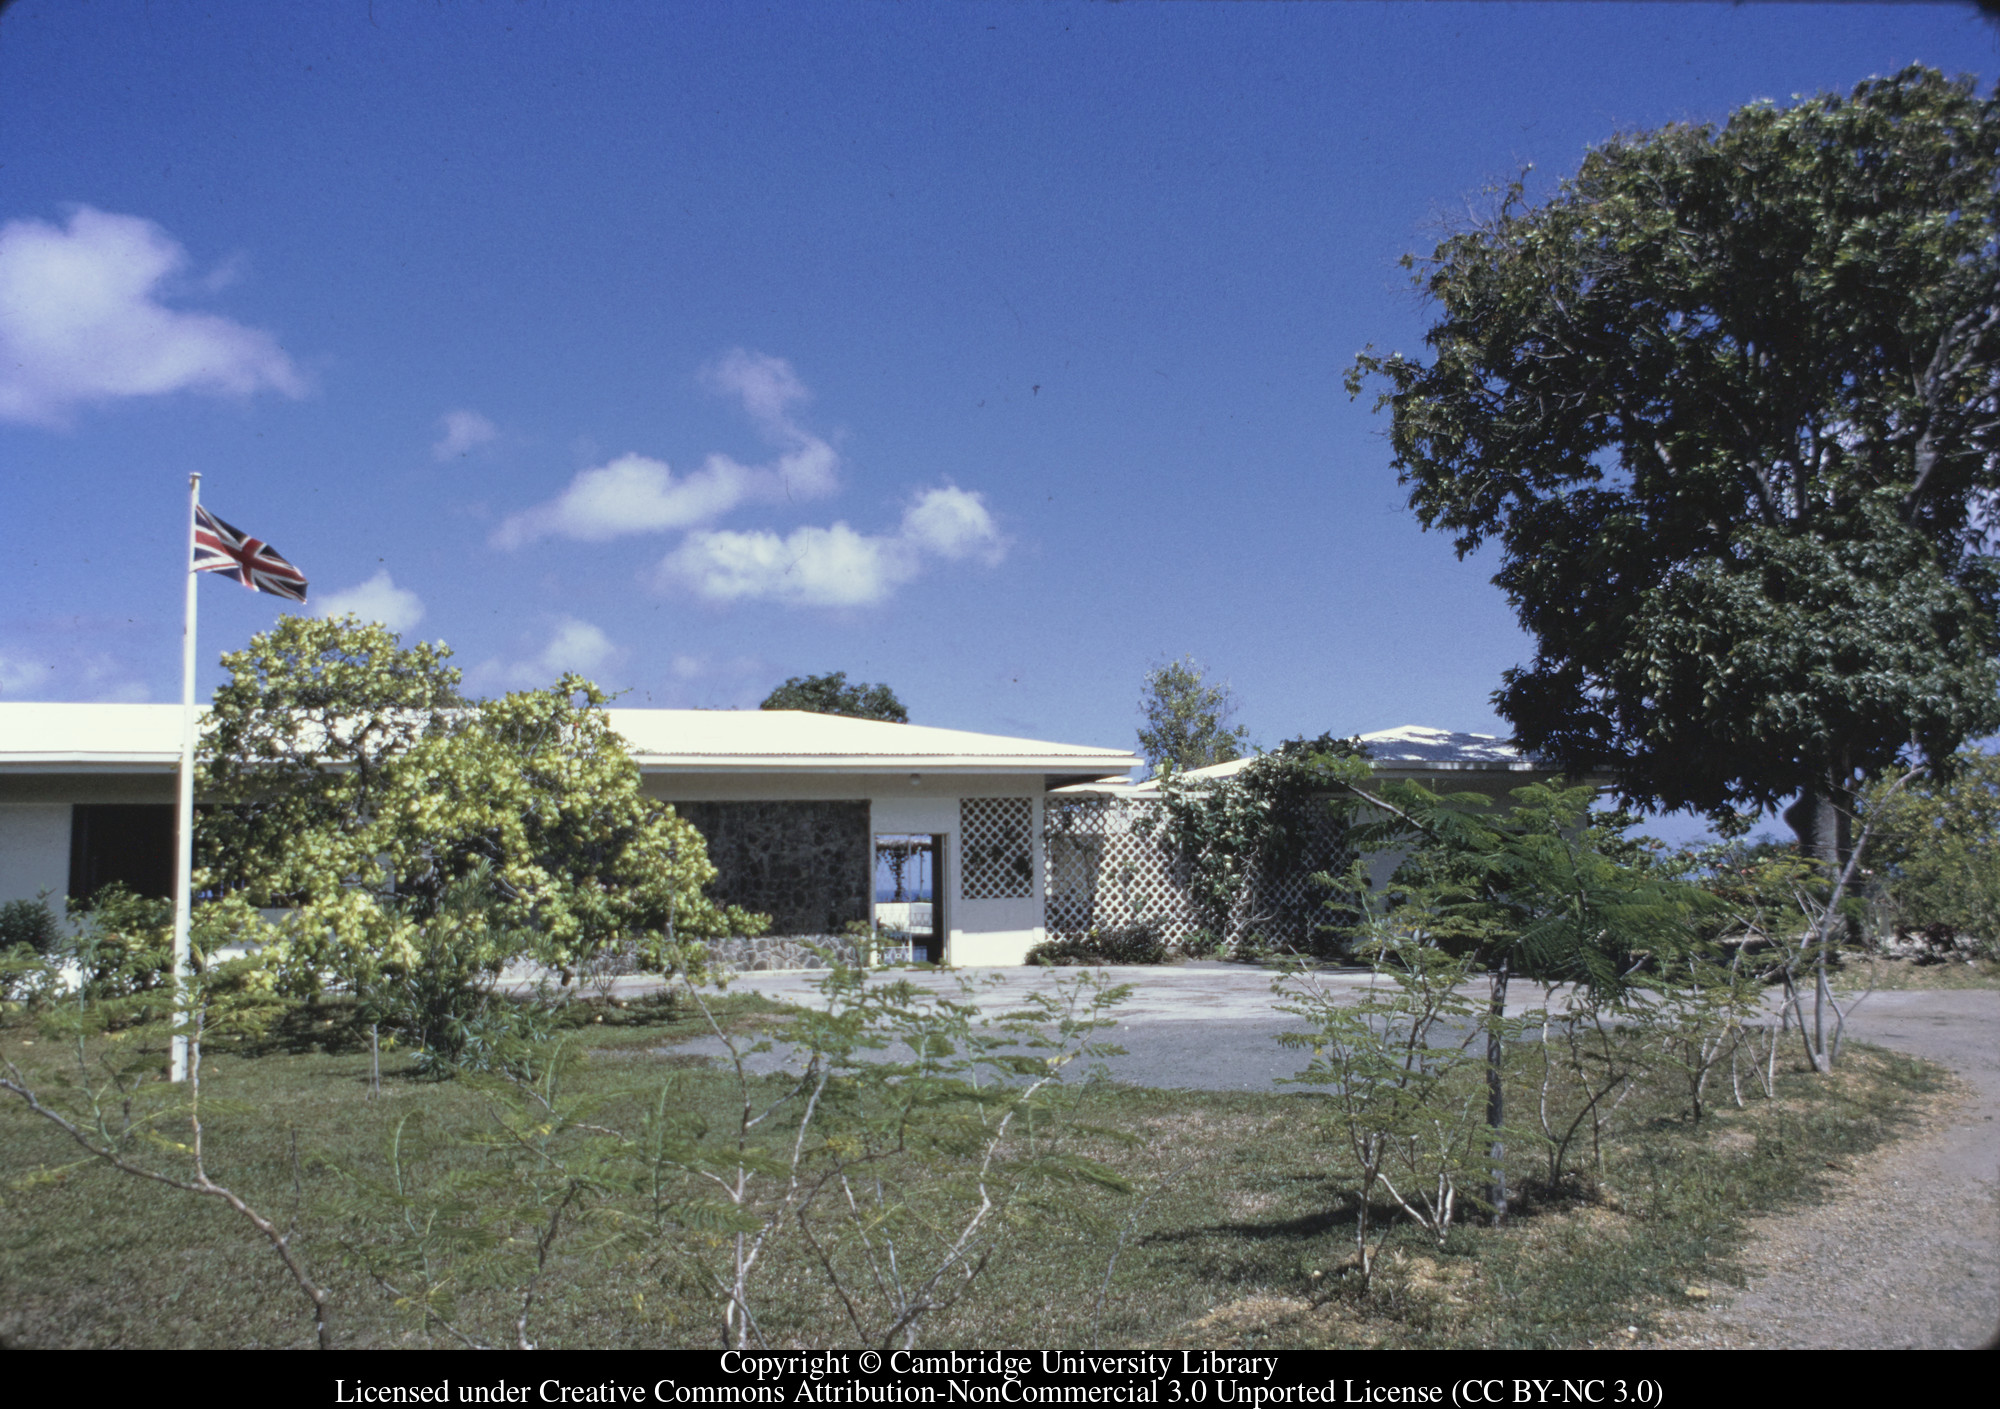 C [Ciceron] : house before replanting hedge, 1971-06